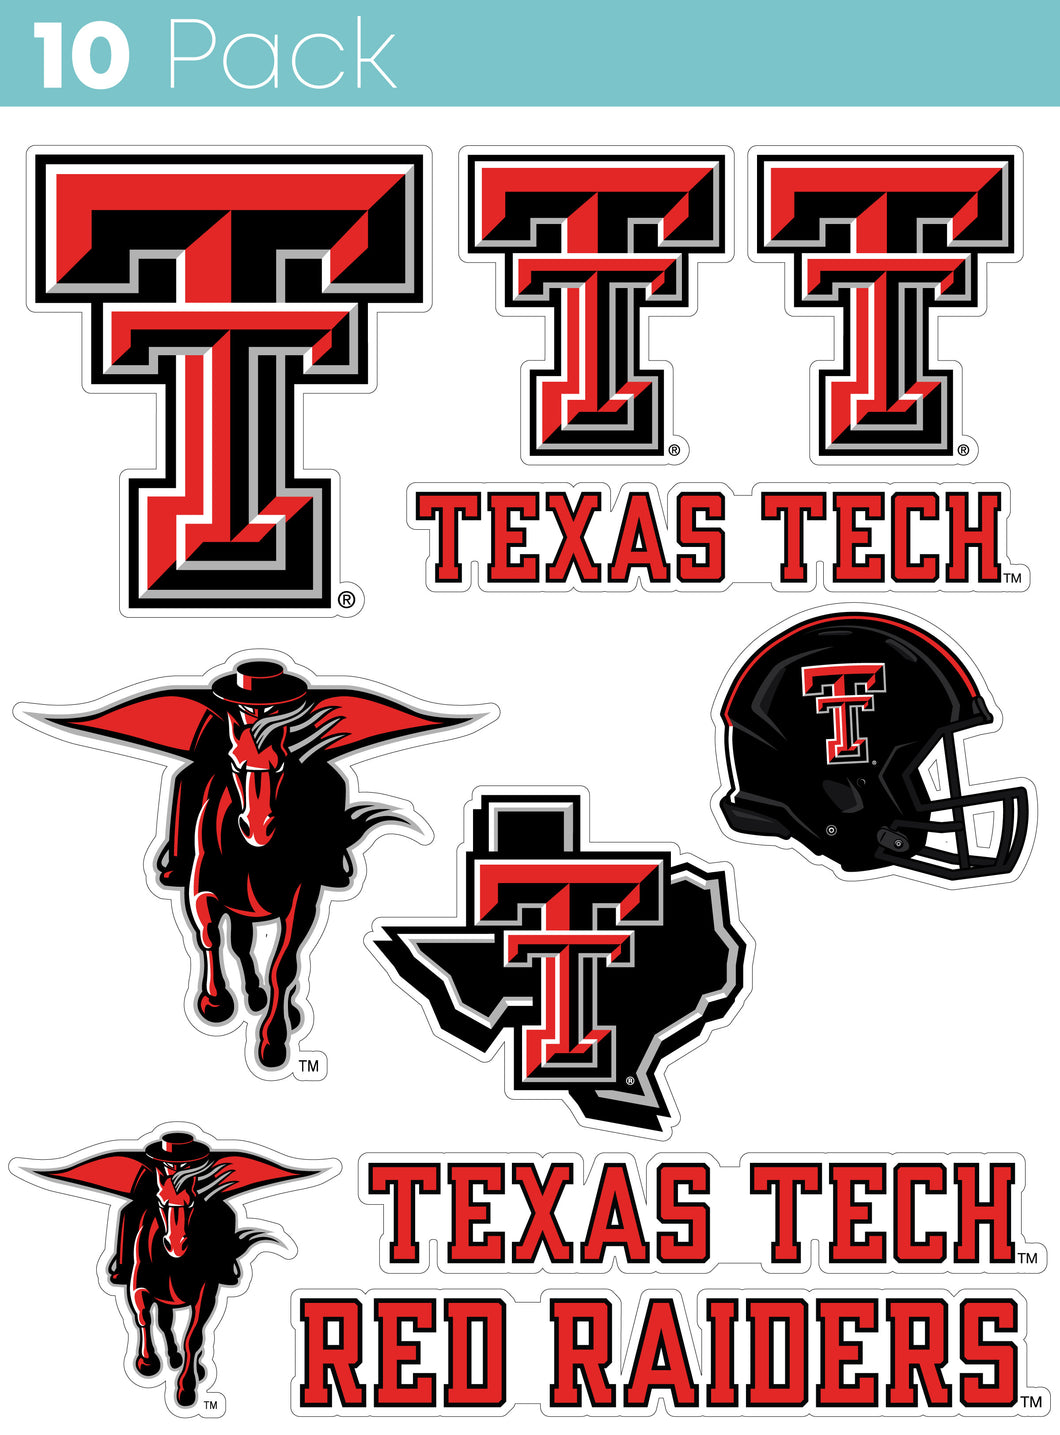 Texas Tech Red Raiders 10-Pack, 4 inches in size on one of its sides NCAA Durable School Spirit Vinyl Decal Sticker